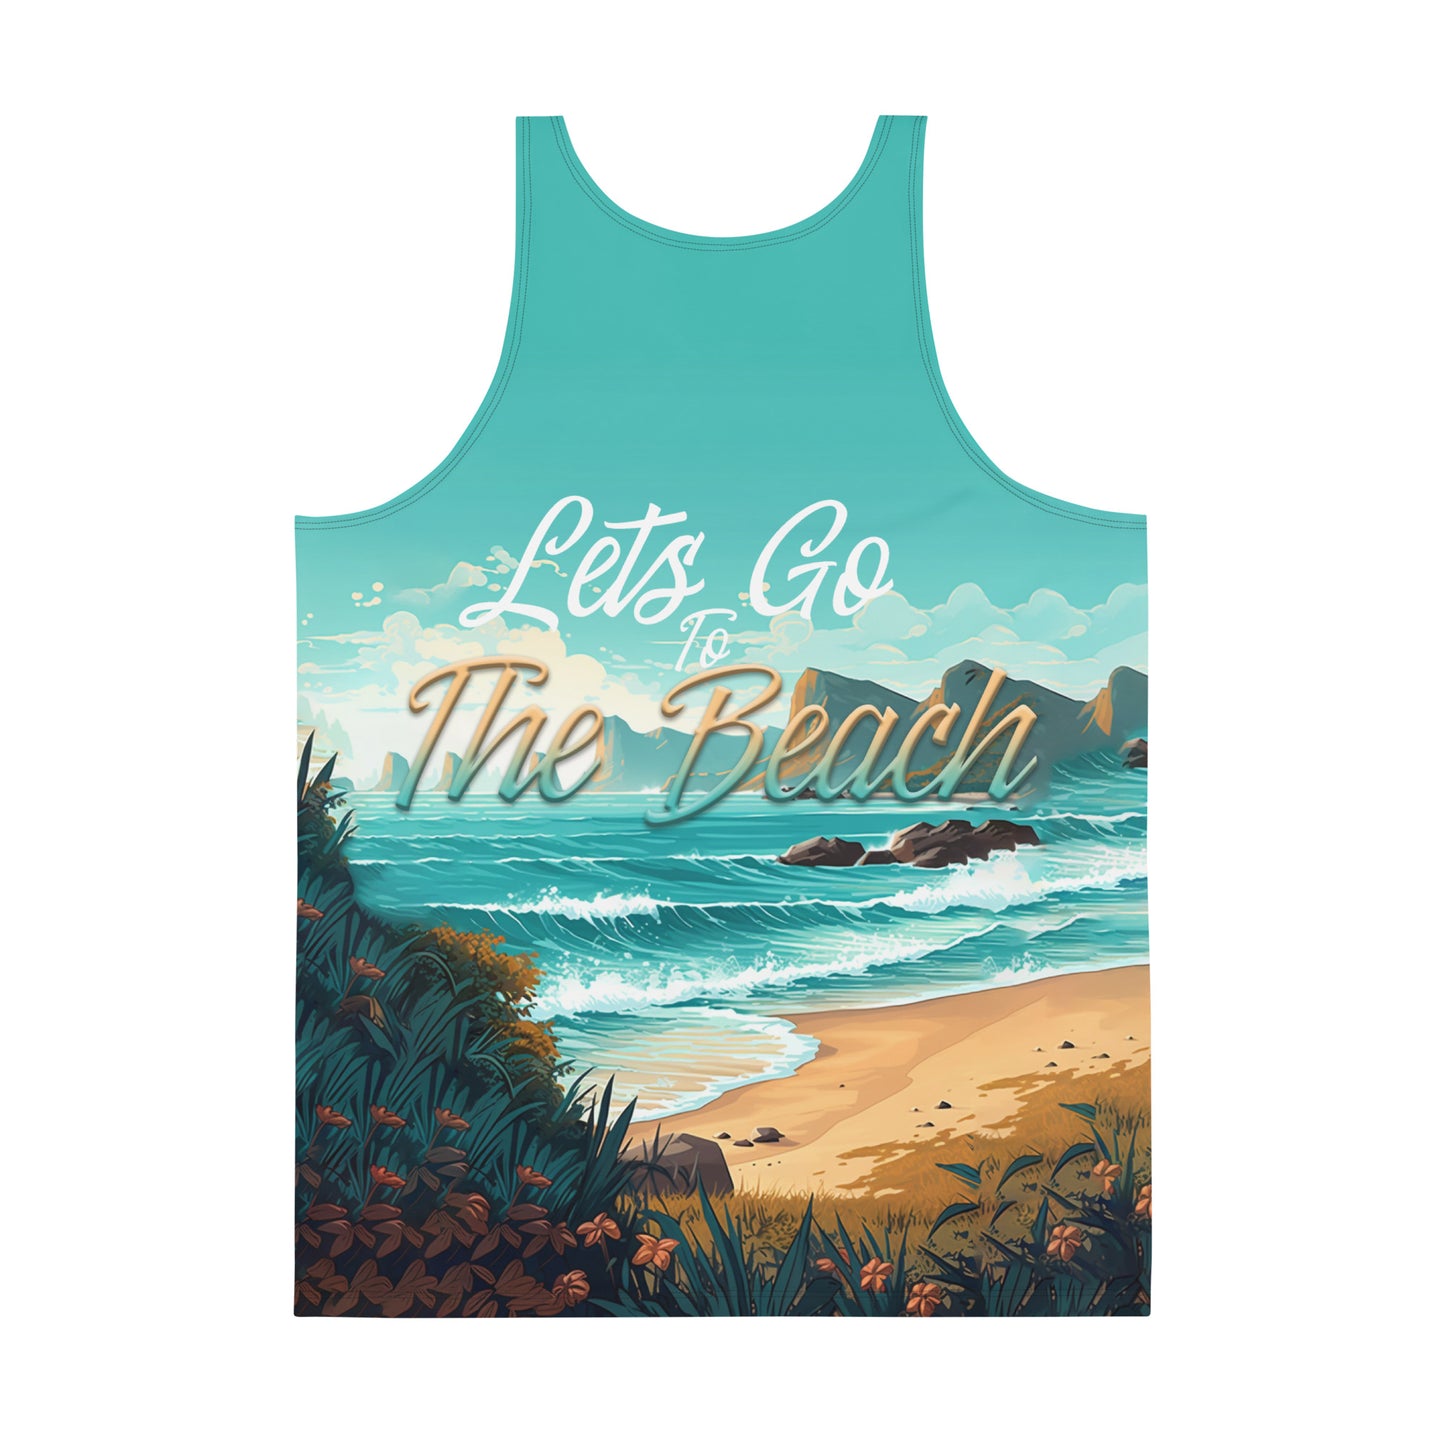 Lets Go To The Beach - Unisex Tank Top